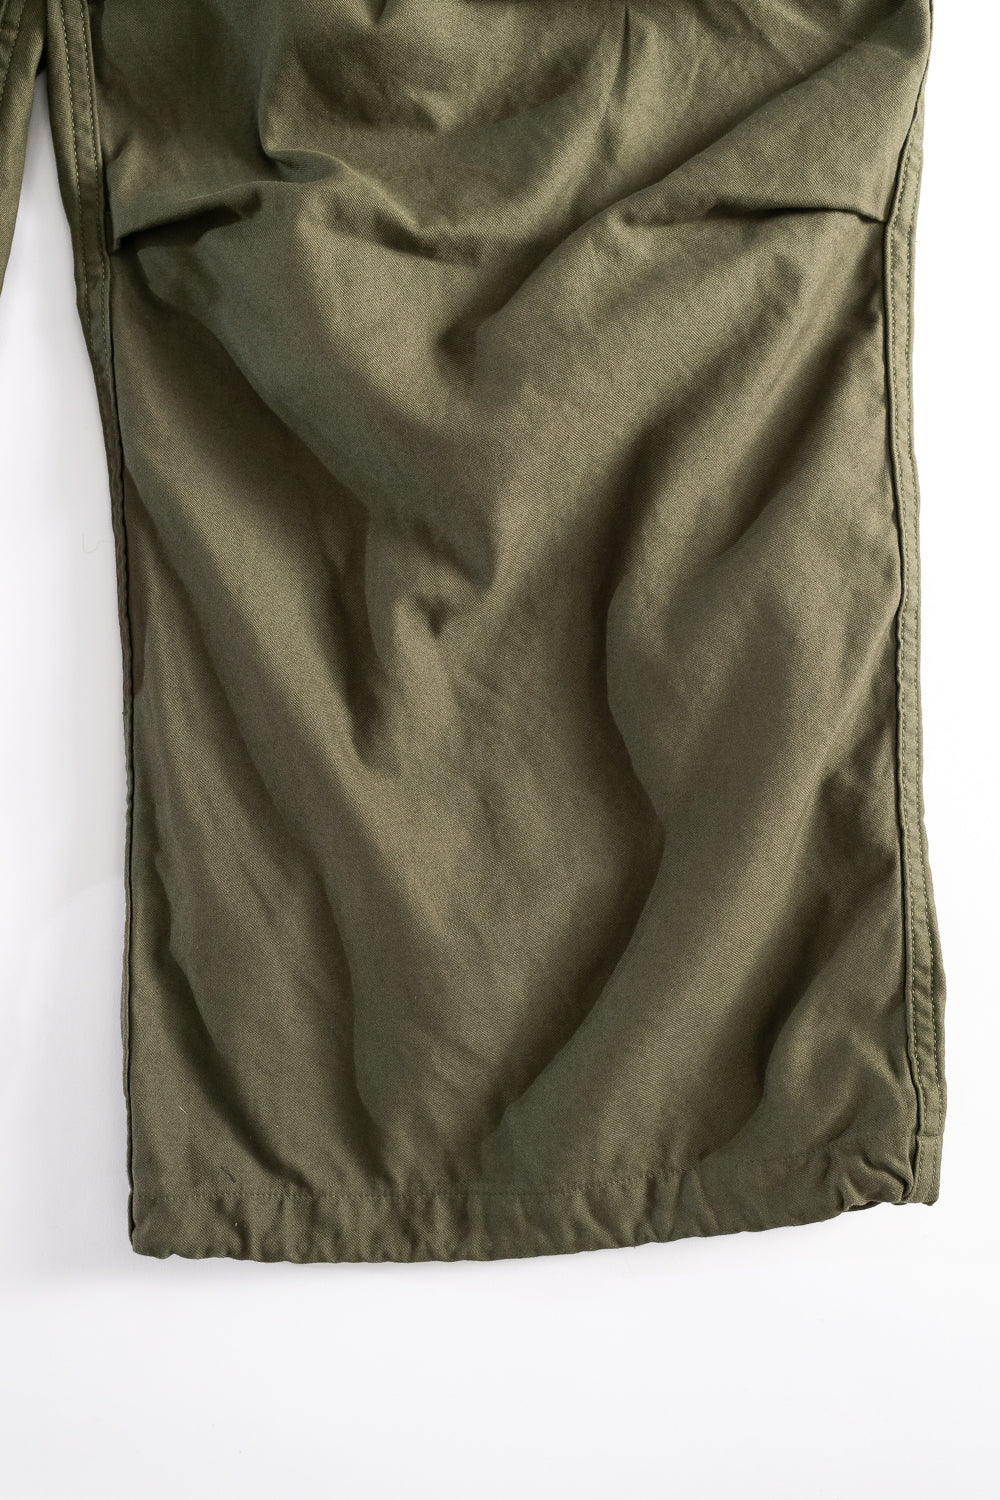 01-5020-76 - Loose Fit Army Trouser - Army Green